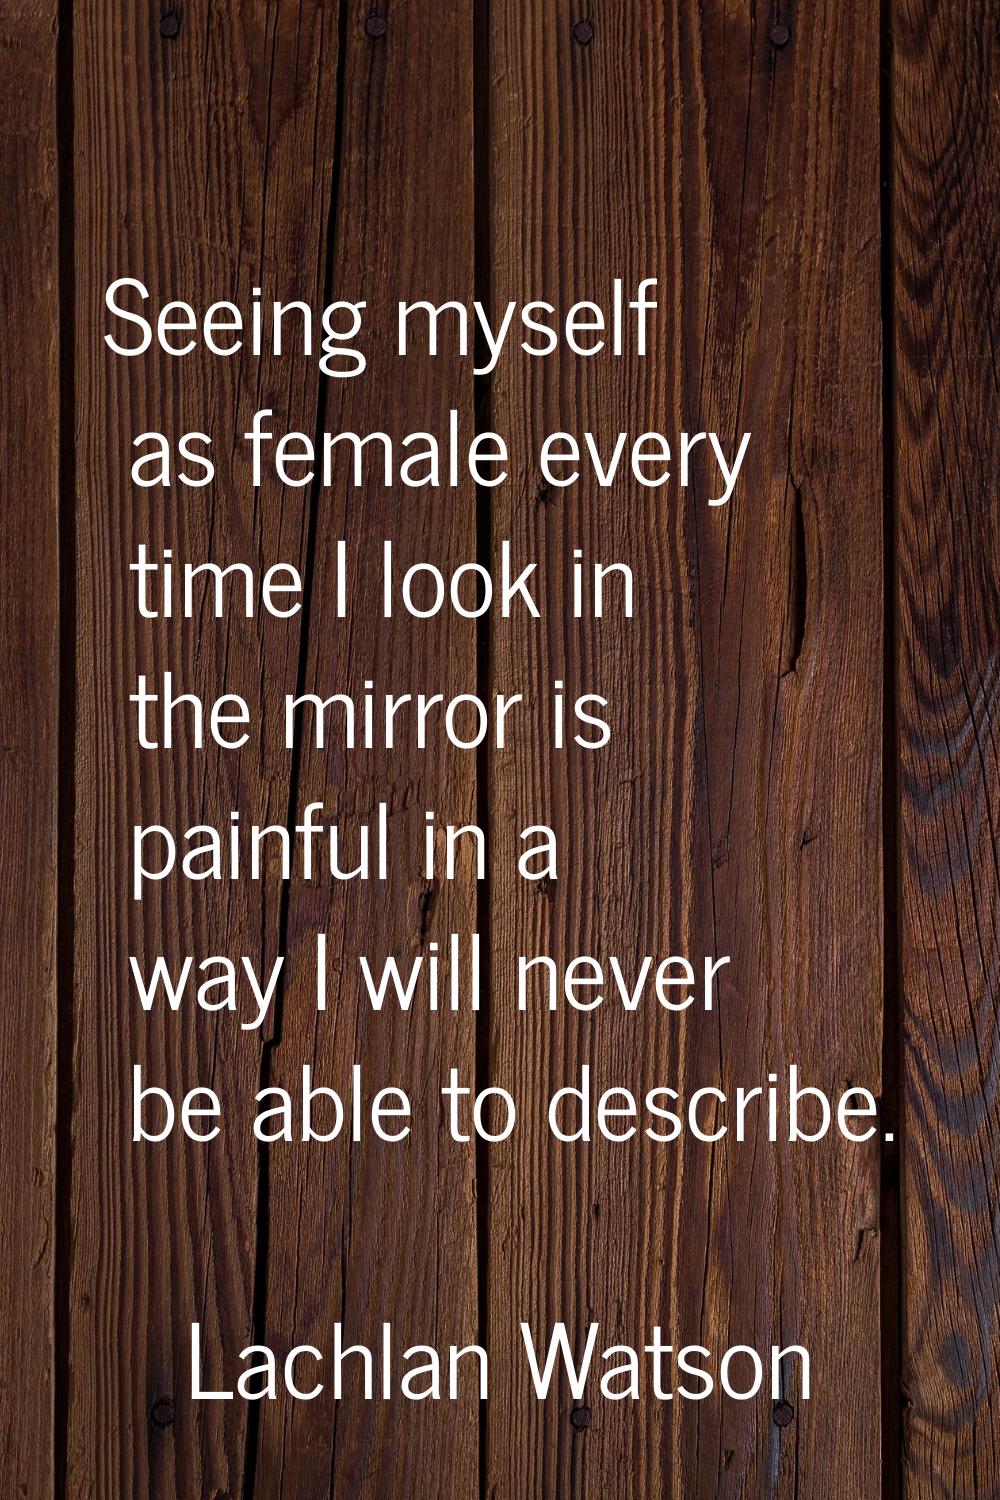 Seeing myself as female every time I look in the mirror is painful in a way I will never be able to